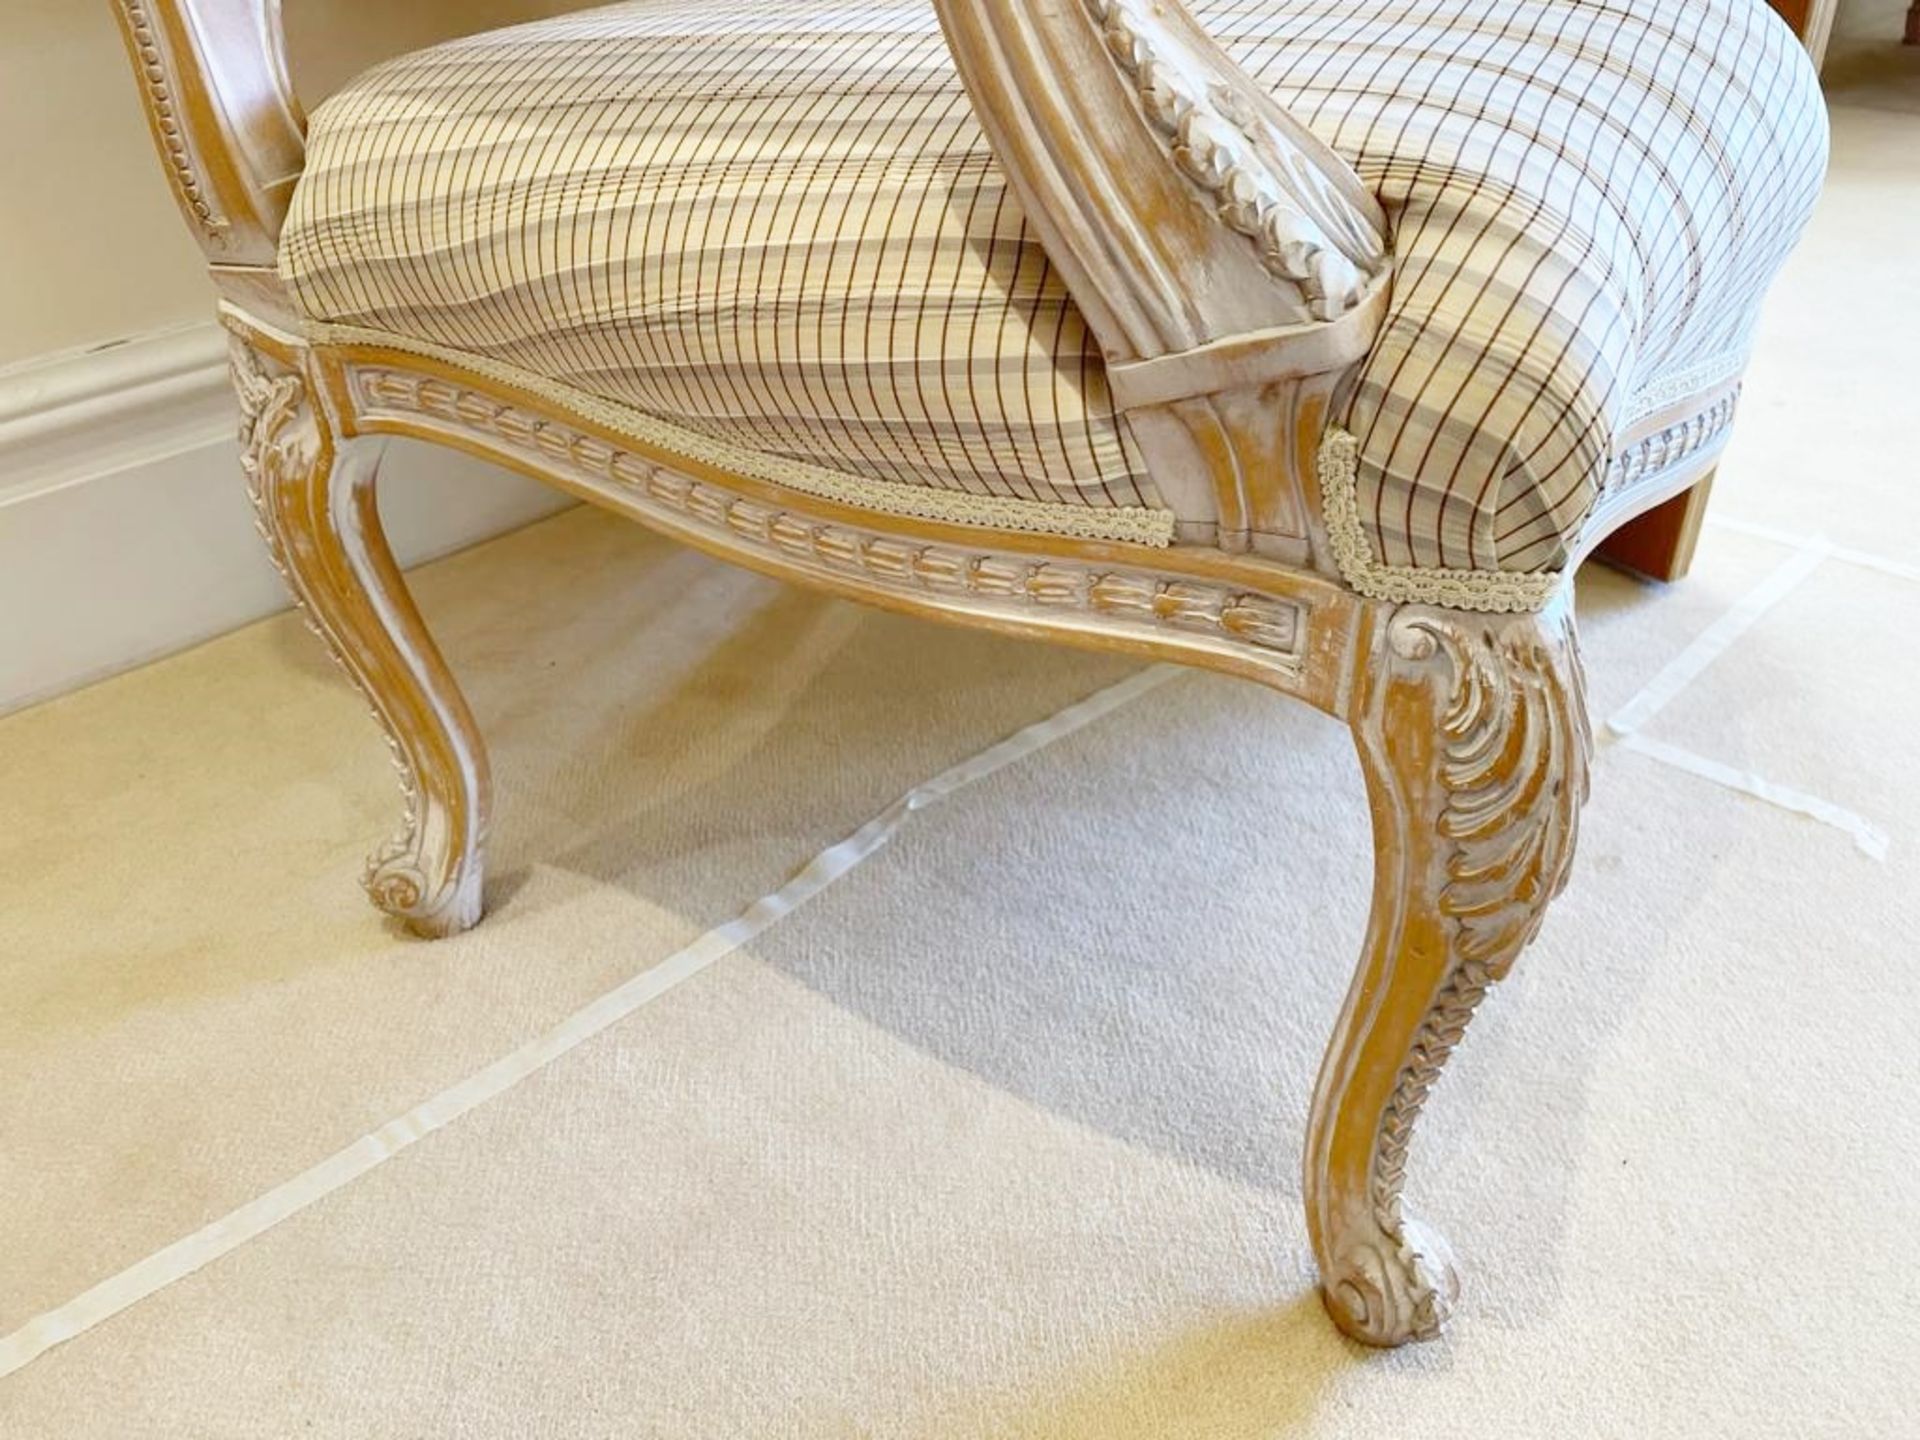 Pair of French Shabby Chic Bedroom Chairs - Stunning Carved Wood Chair Upholstered With Striped - Image 3 of 16